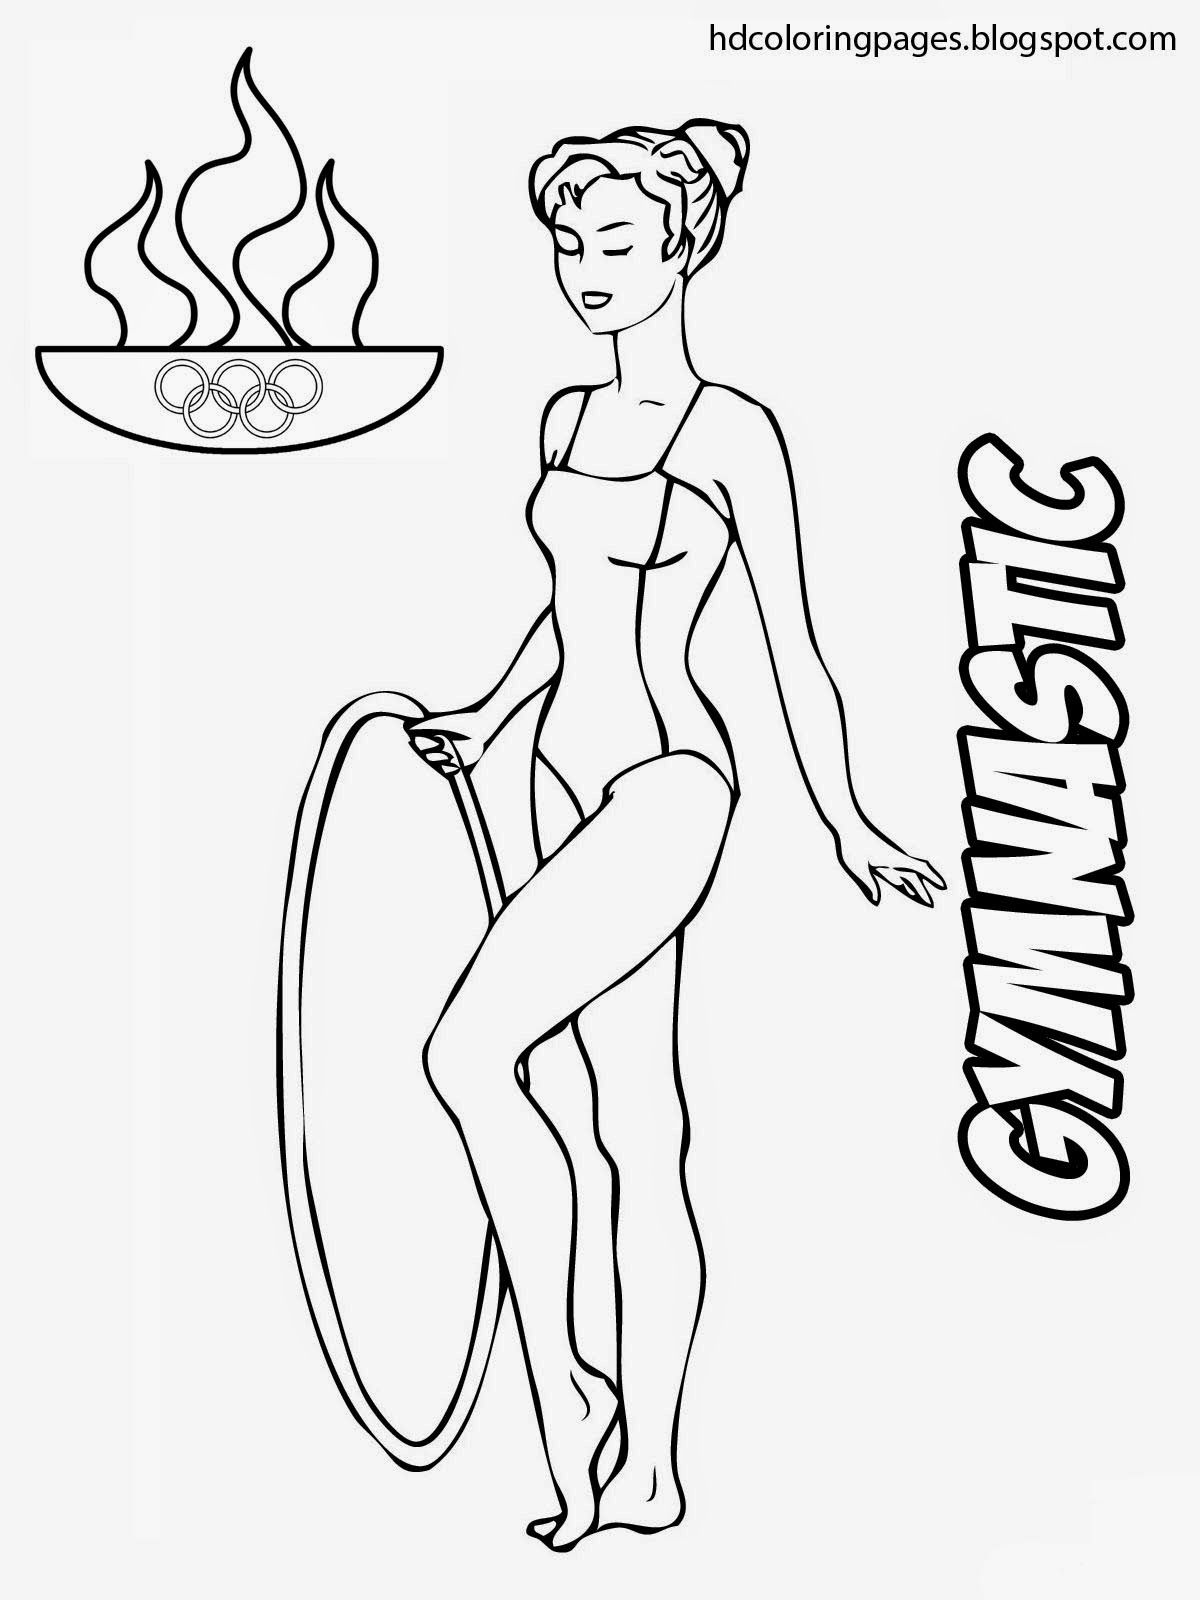 Gymnastics S - Coloring Pages for Kids and for Adults